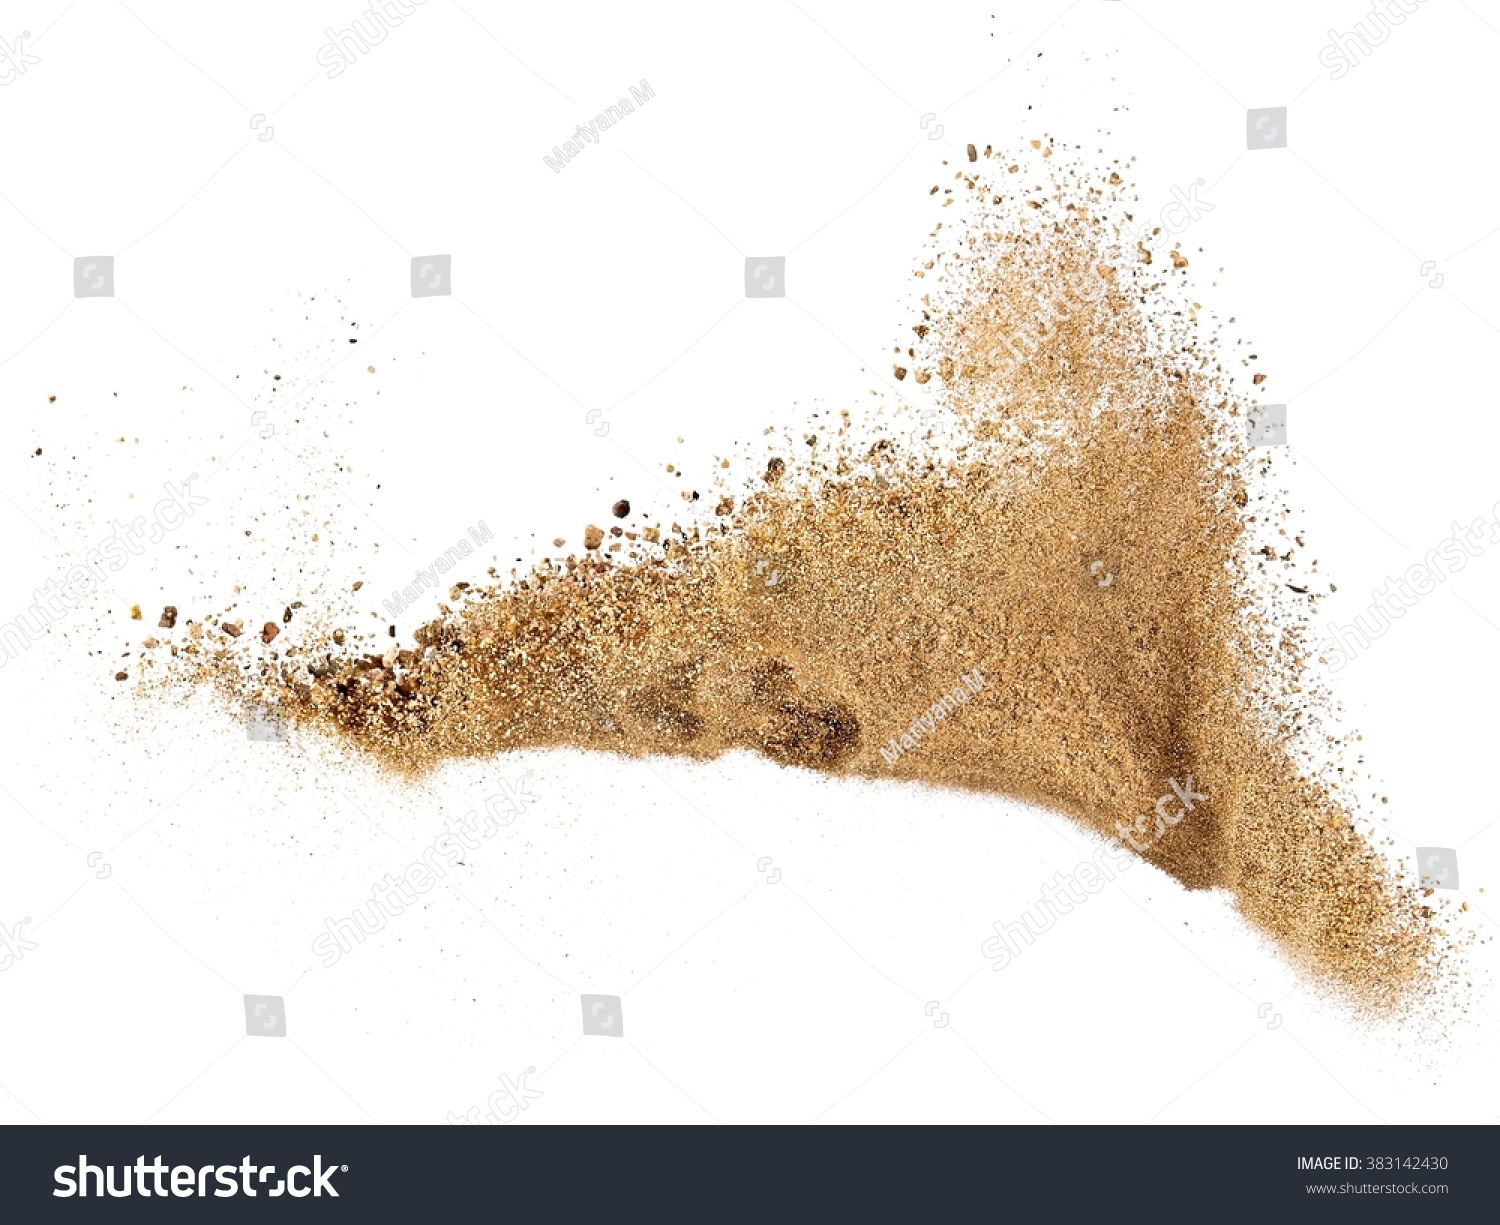 River sand explosion #383142430